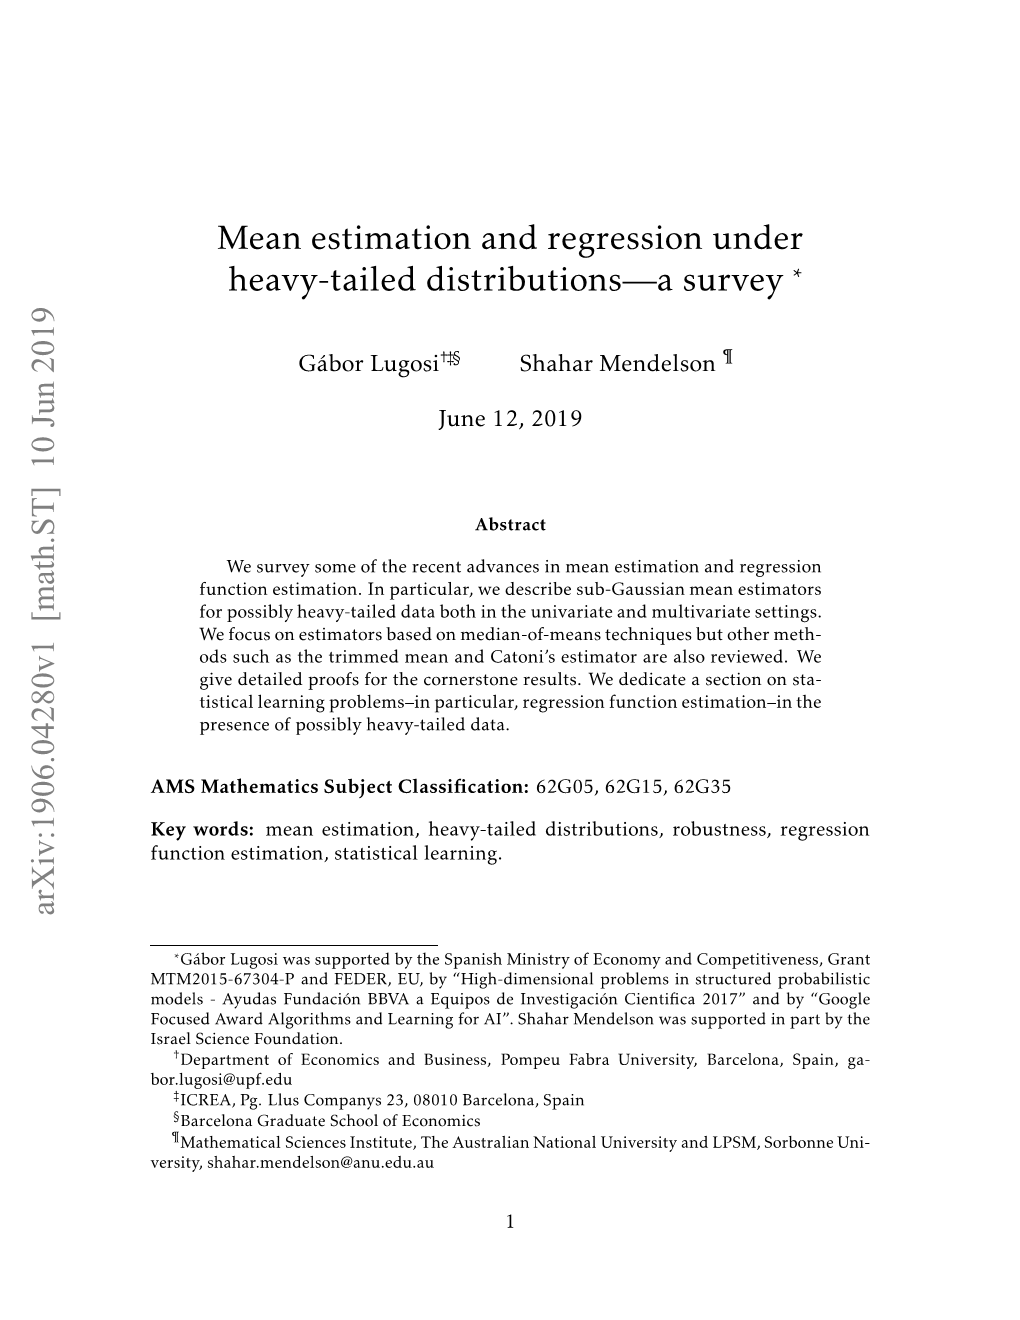 Mean Estimation and Regression Under Heavy-Tailed Distributions—A